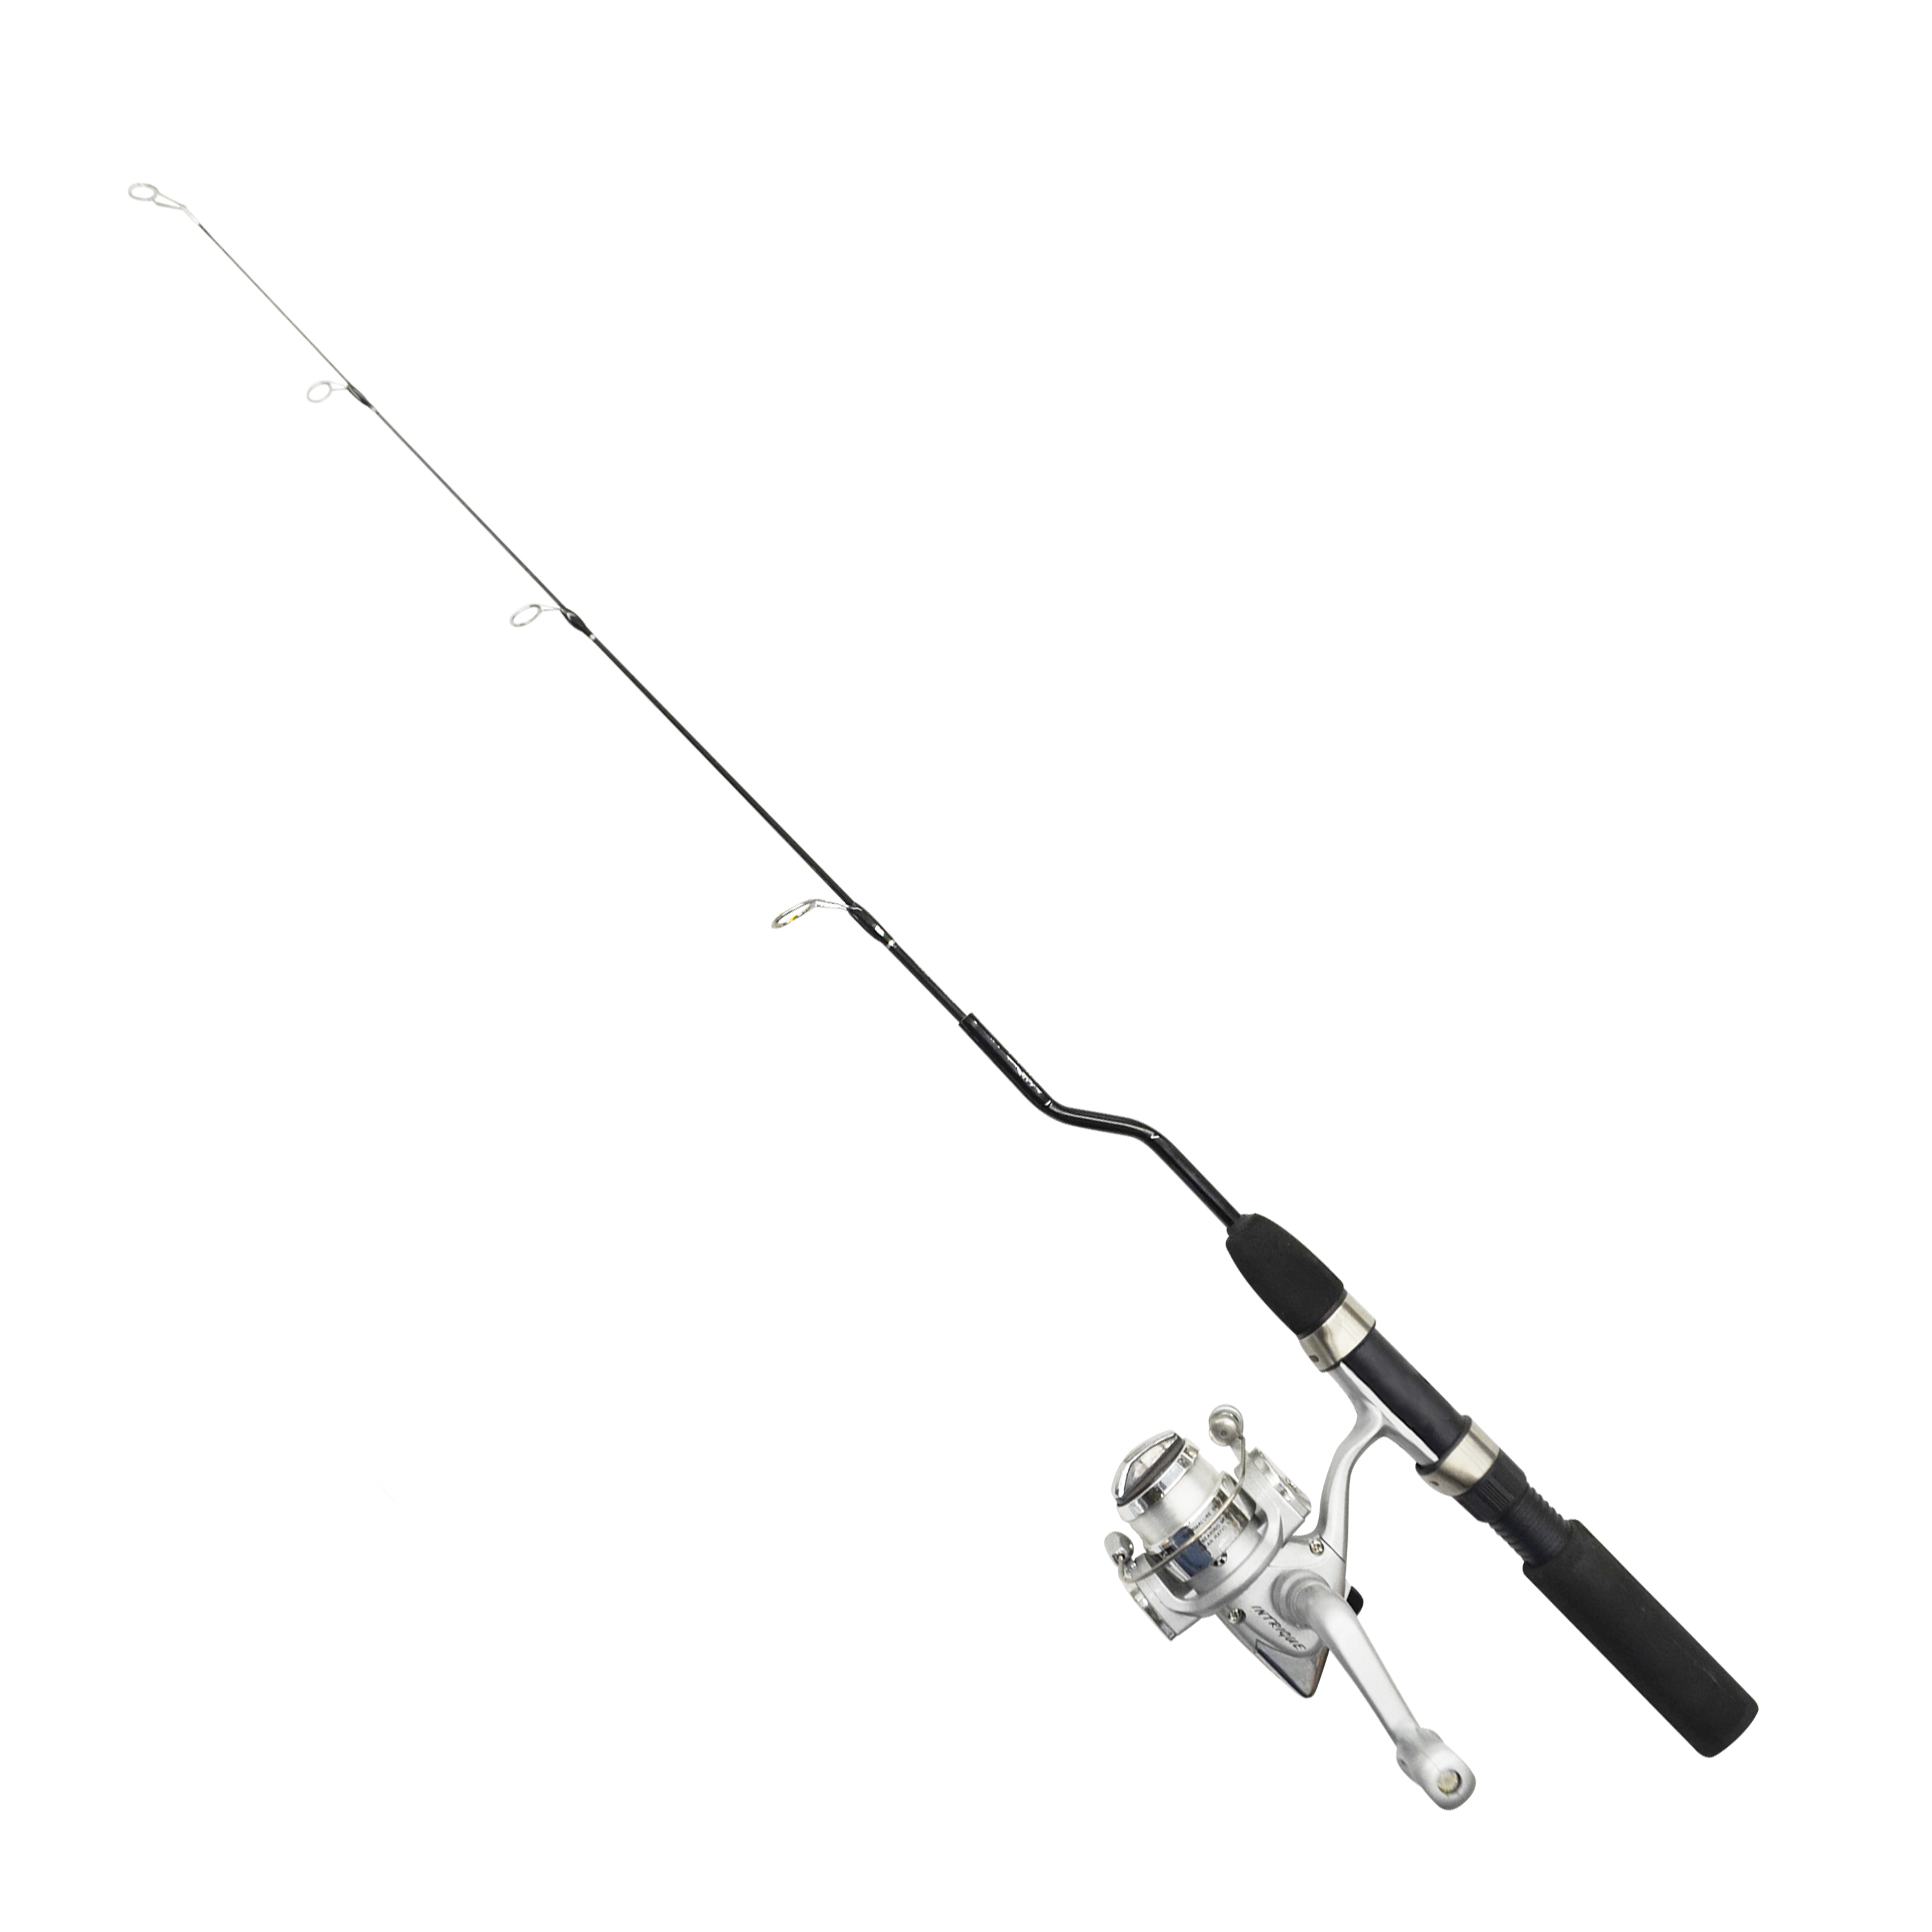 HT Enterprises Slick Ice Fishing Rod and Reel Combo, 28" Medium Action Rod and Reel - image 1 of 3